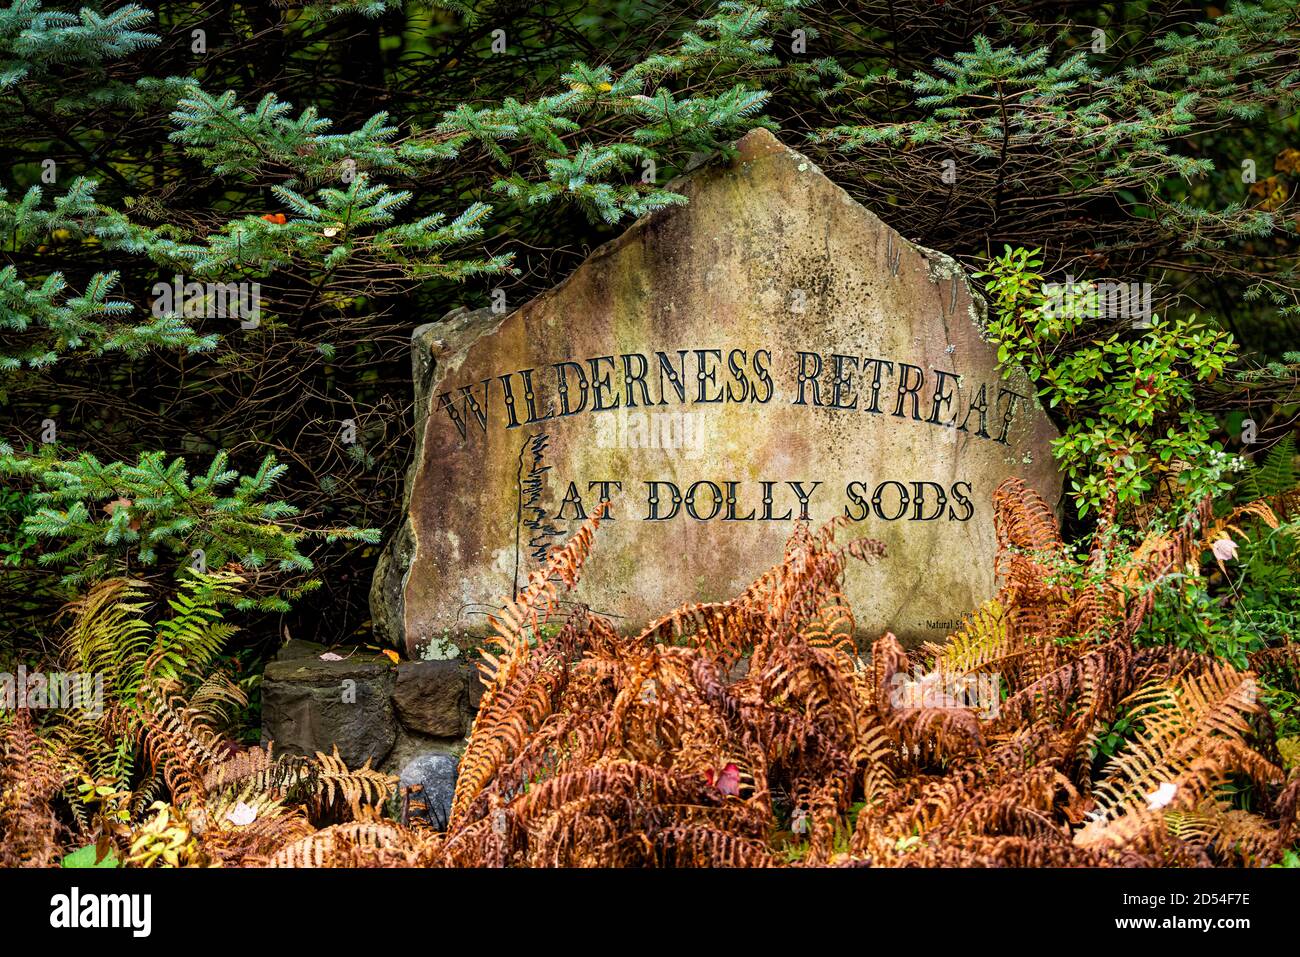 Davis, USA - October 5, 2020: Sign for Wilderness Retreat at Dolly Sods on stone rock in Monongahela National Forest Stock Photo